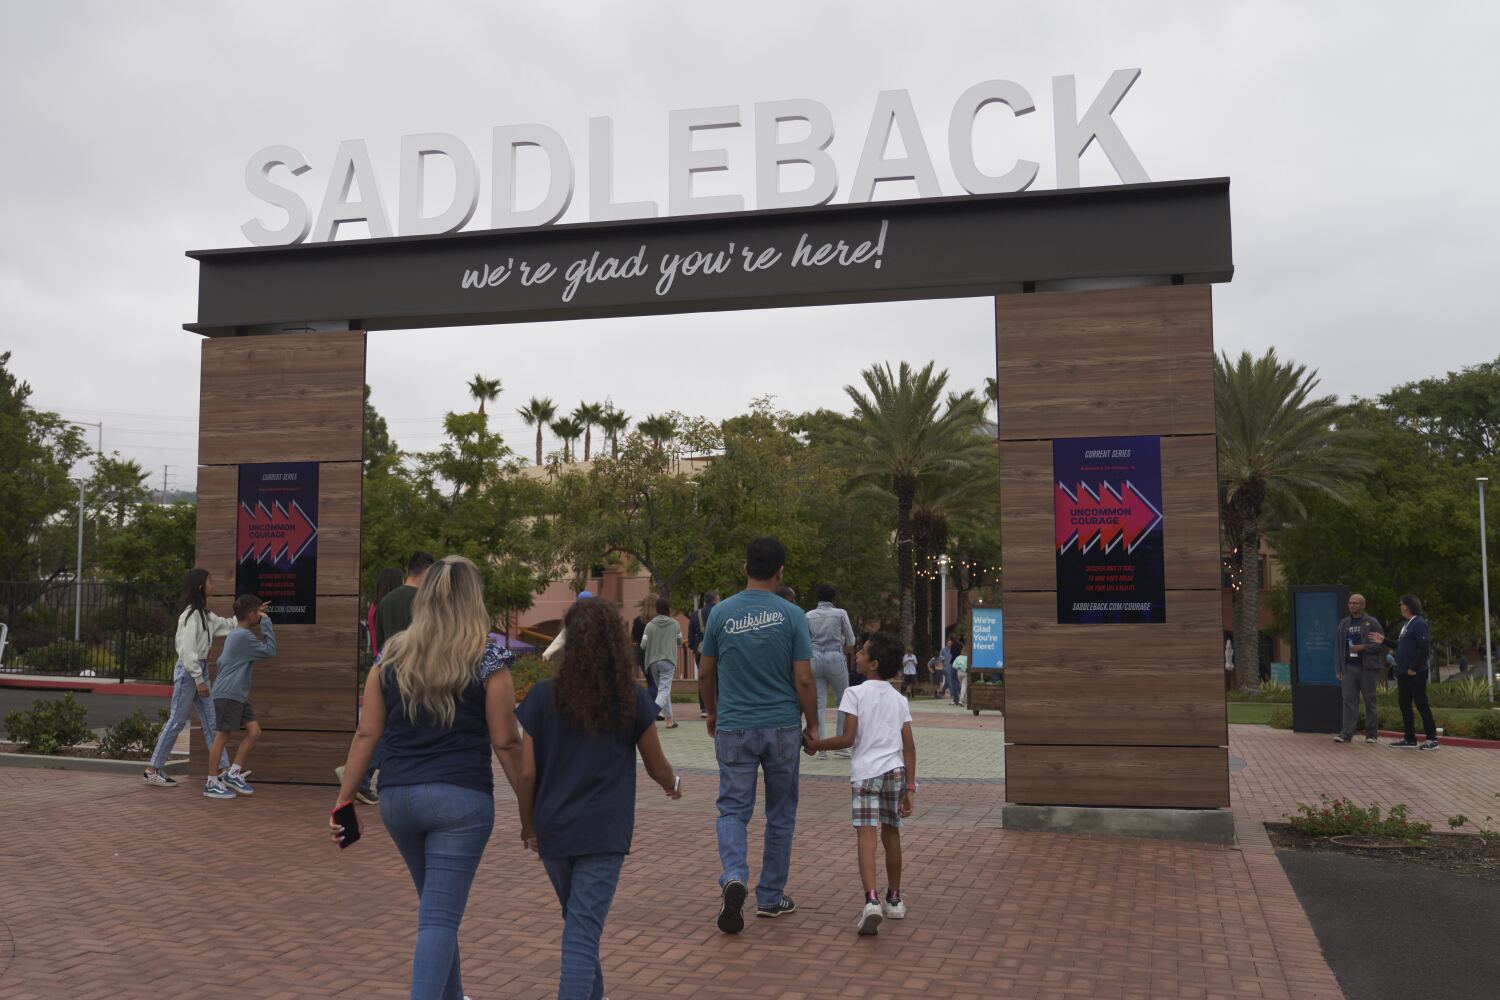 Saddleback Church ordained women. So the Southern Baptist Convention gave it the boot